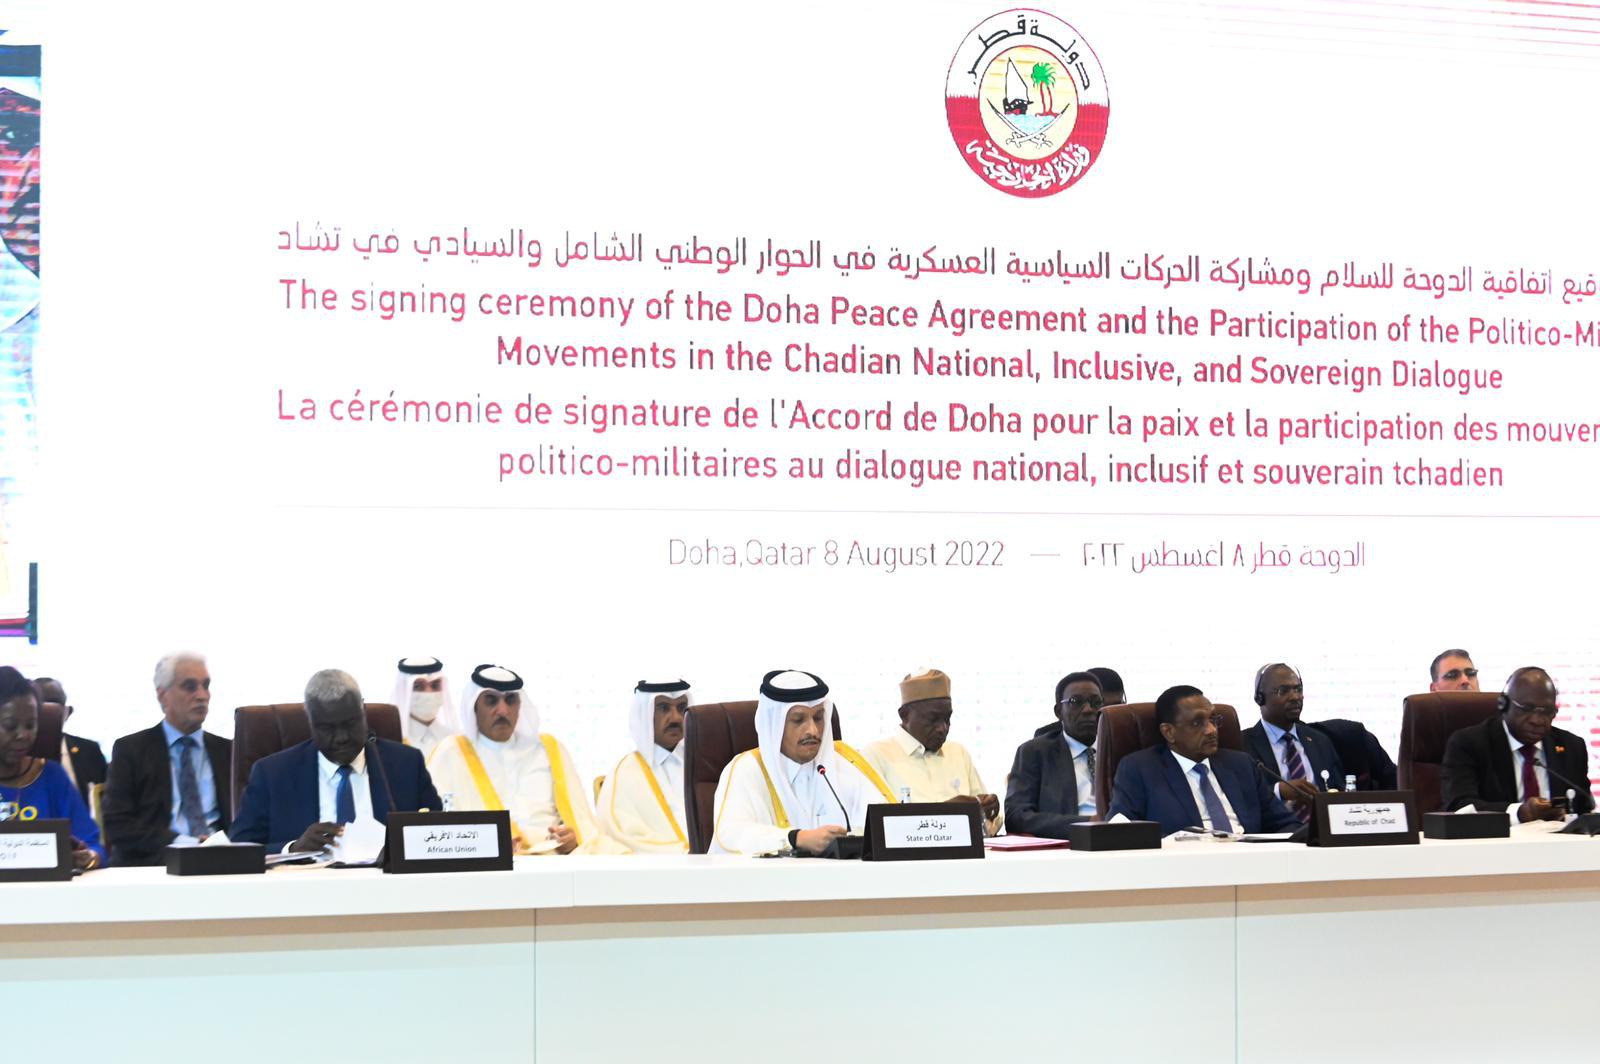 Qatar Hosts Signing of Doha Peace Agreement, Participation of Politico-Military Movements in Chadian National, Inclusive, and Sovereign Dialogue 